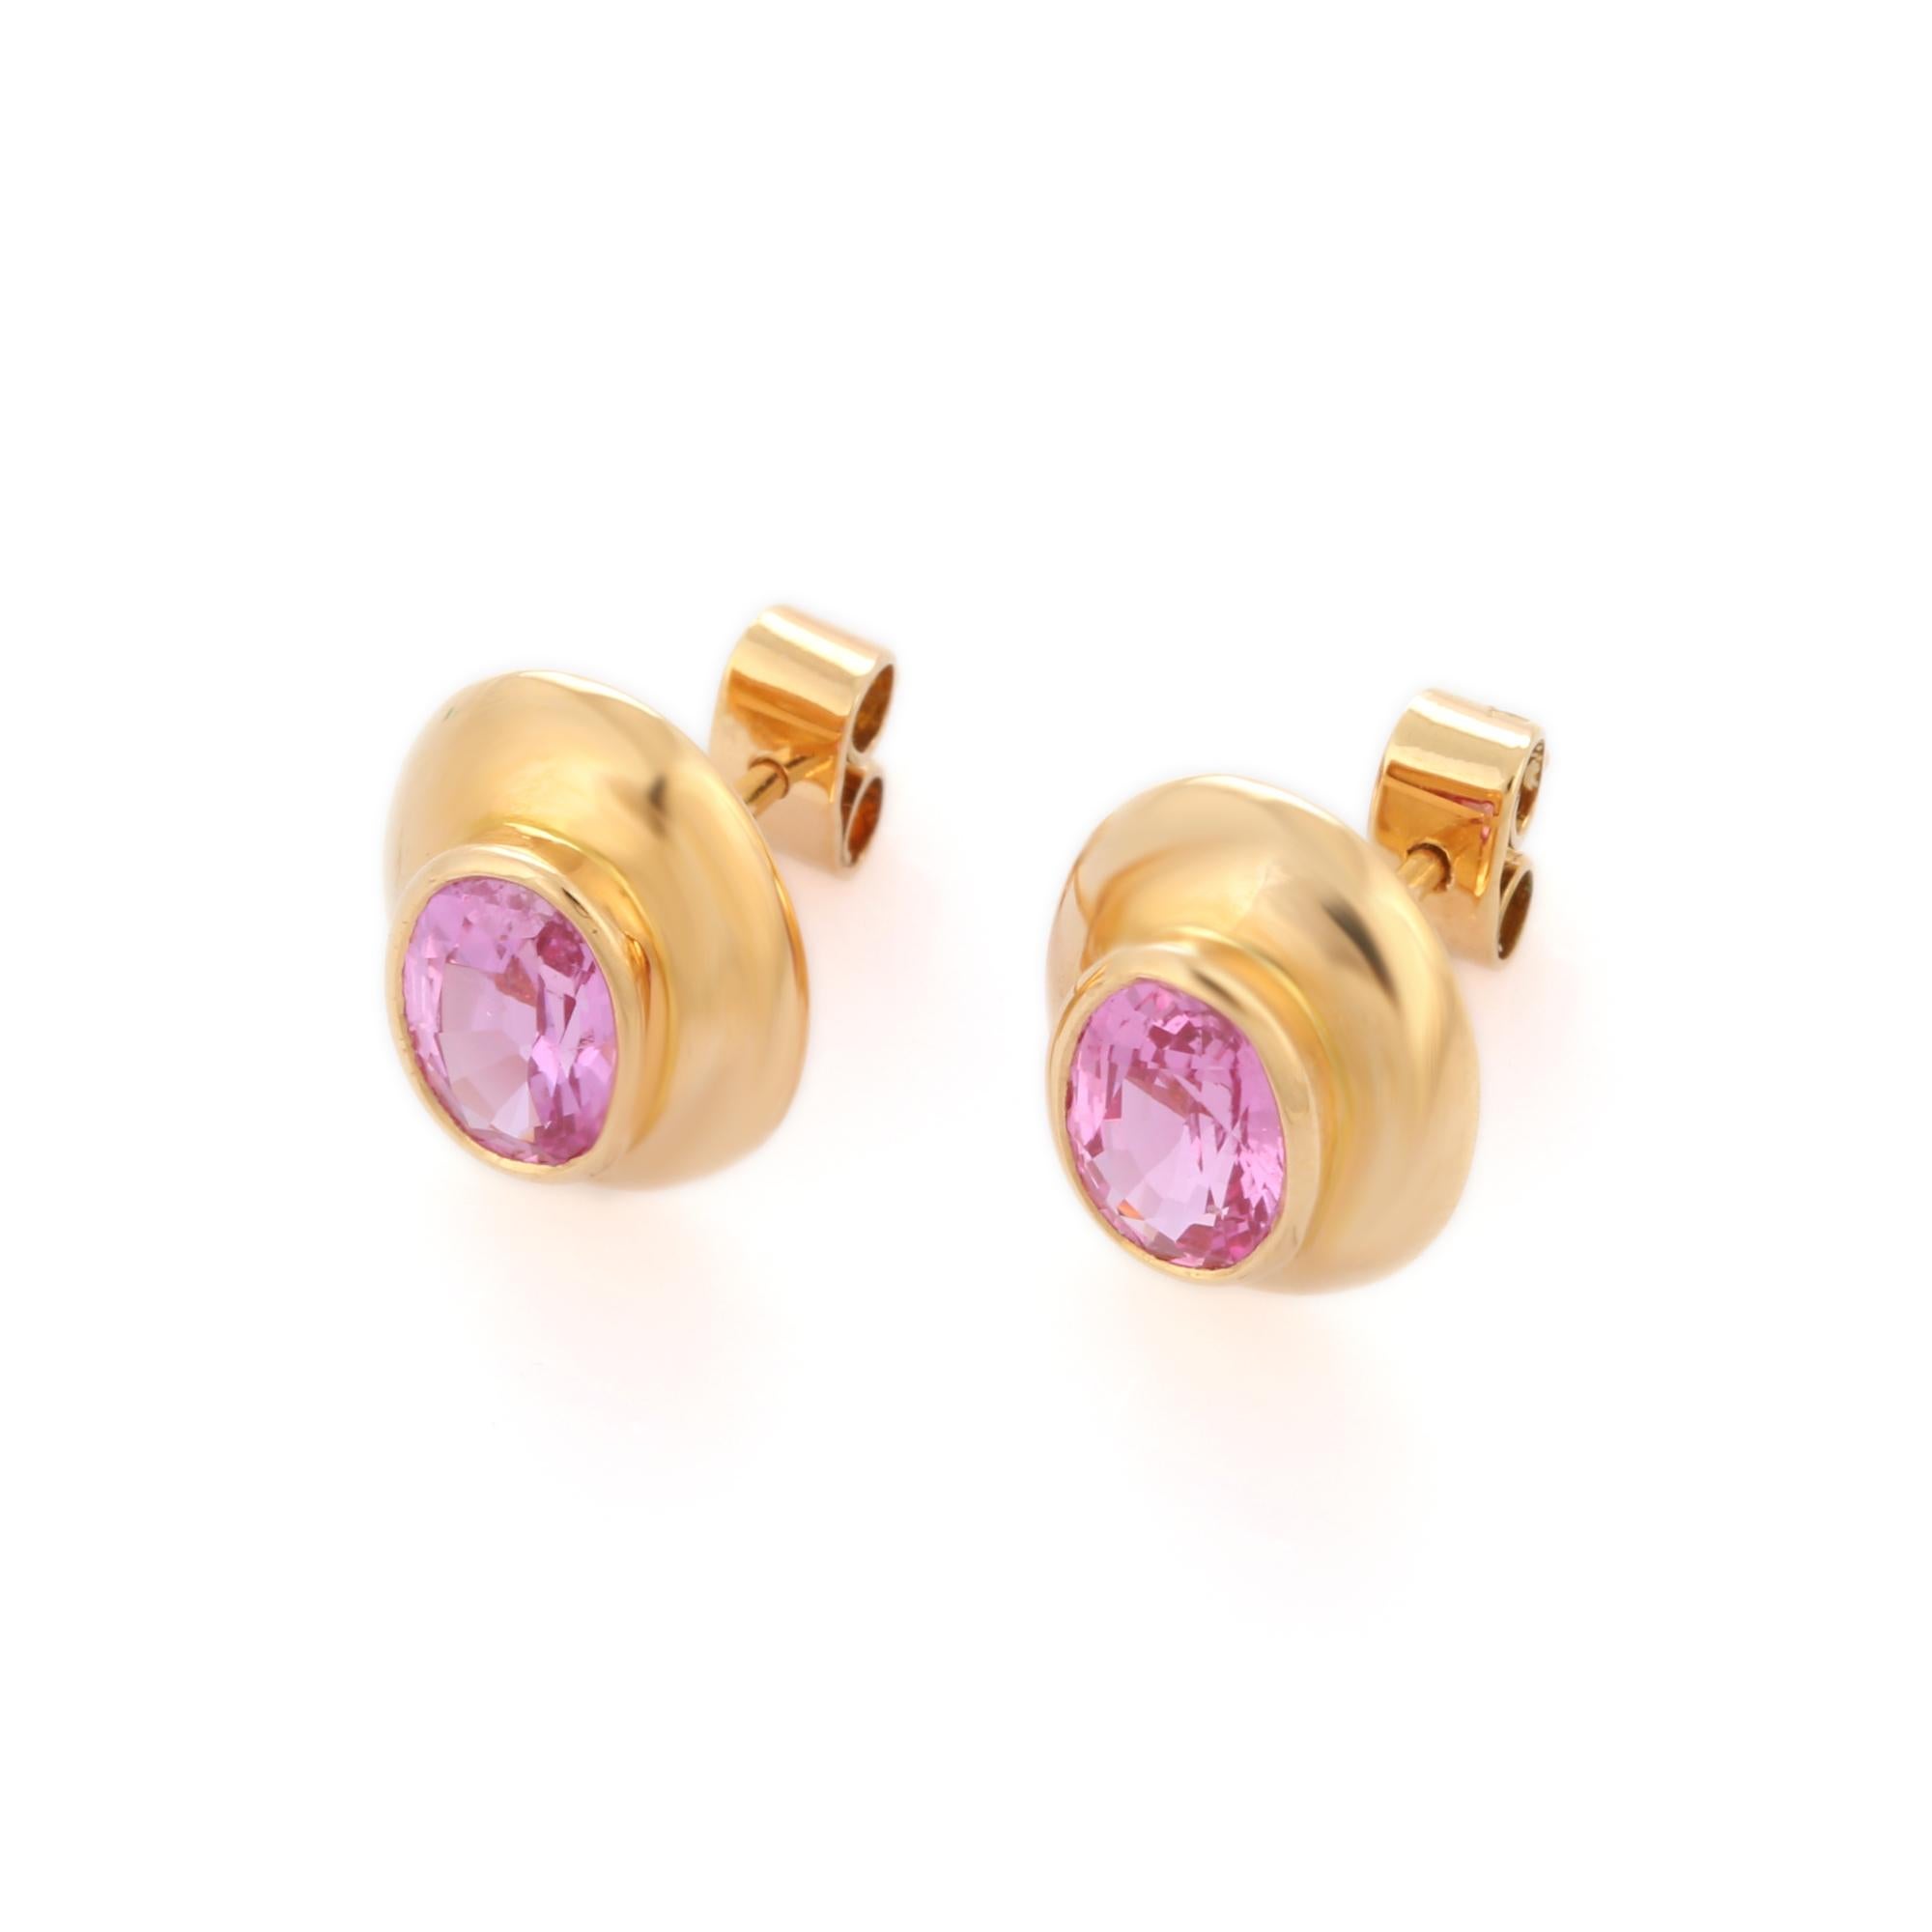 Studs create a subtle beauty while showcasing the colors of the natural precious gemstones making a statement.

Oval cut pink sapphire studs in 18K gold. Embrace your look with these stunning pair of earrings suitable for any occasion to complete